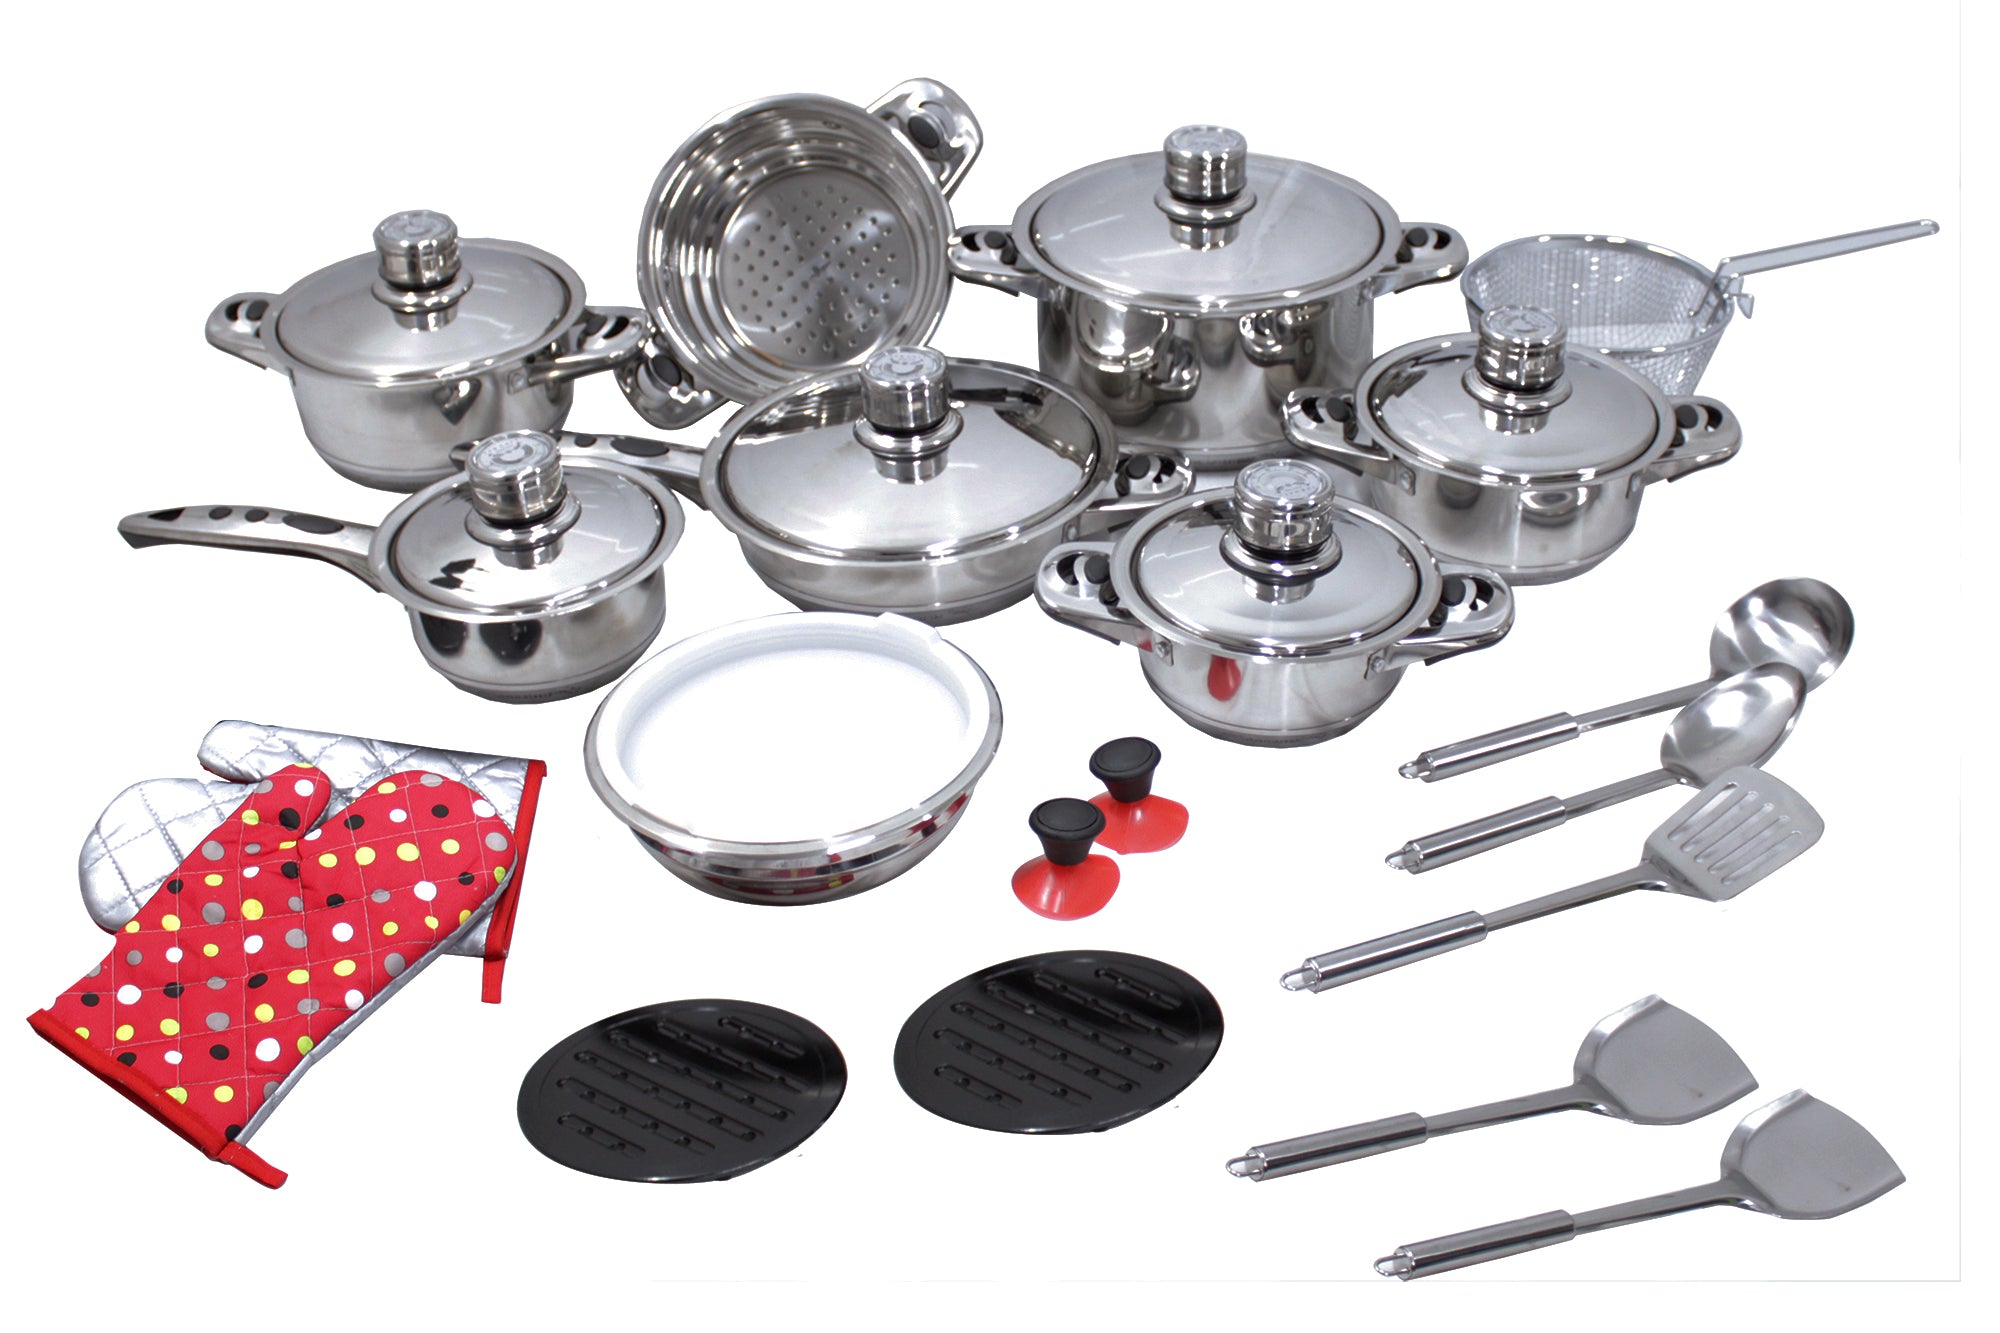 27 Piece 11-Layered Stainless Steel Cookware Set